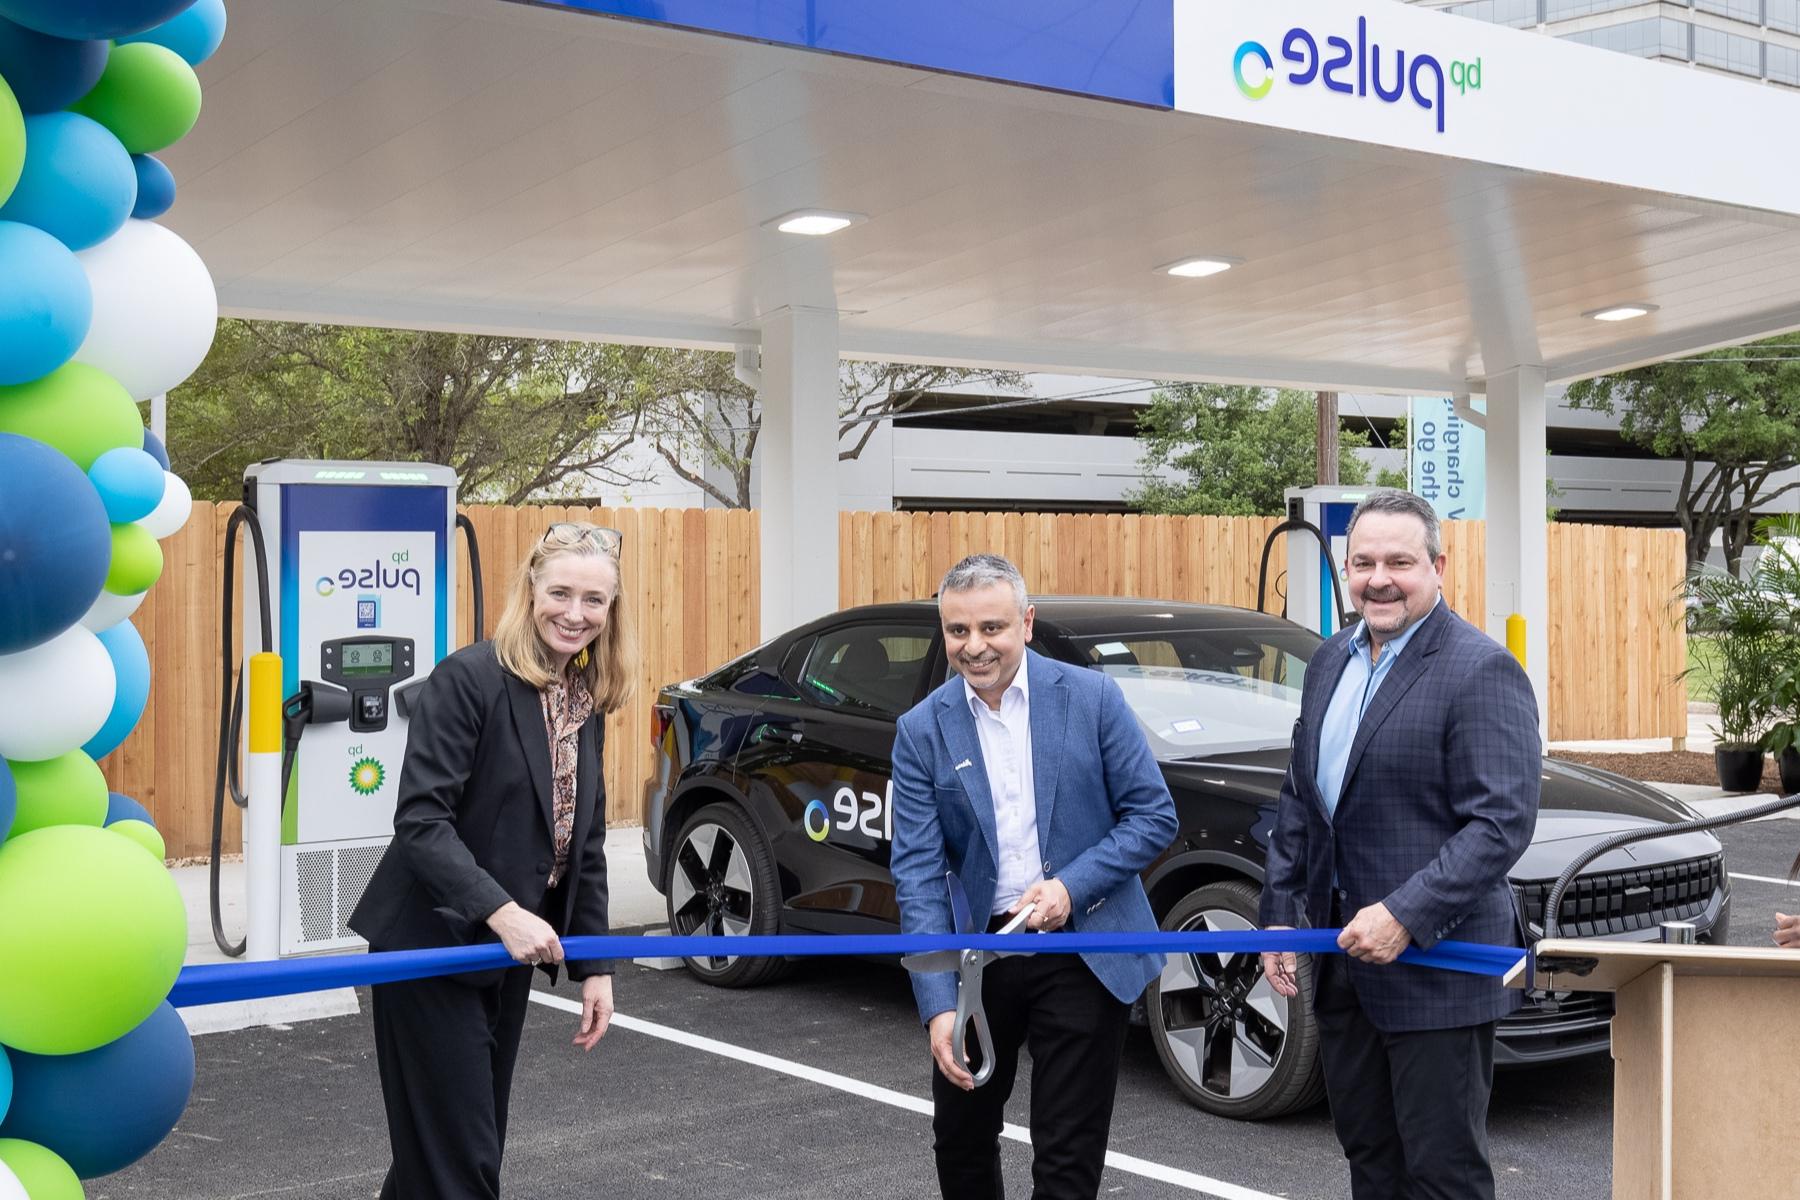 Ribbon cutting ceremony for bp pulse's EV charging station in the Energy Corridor